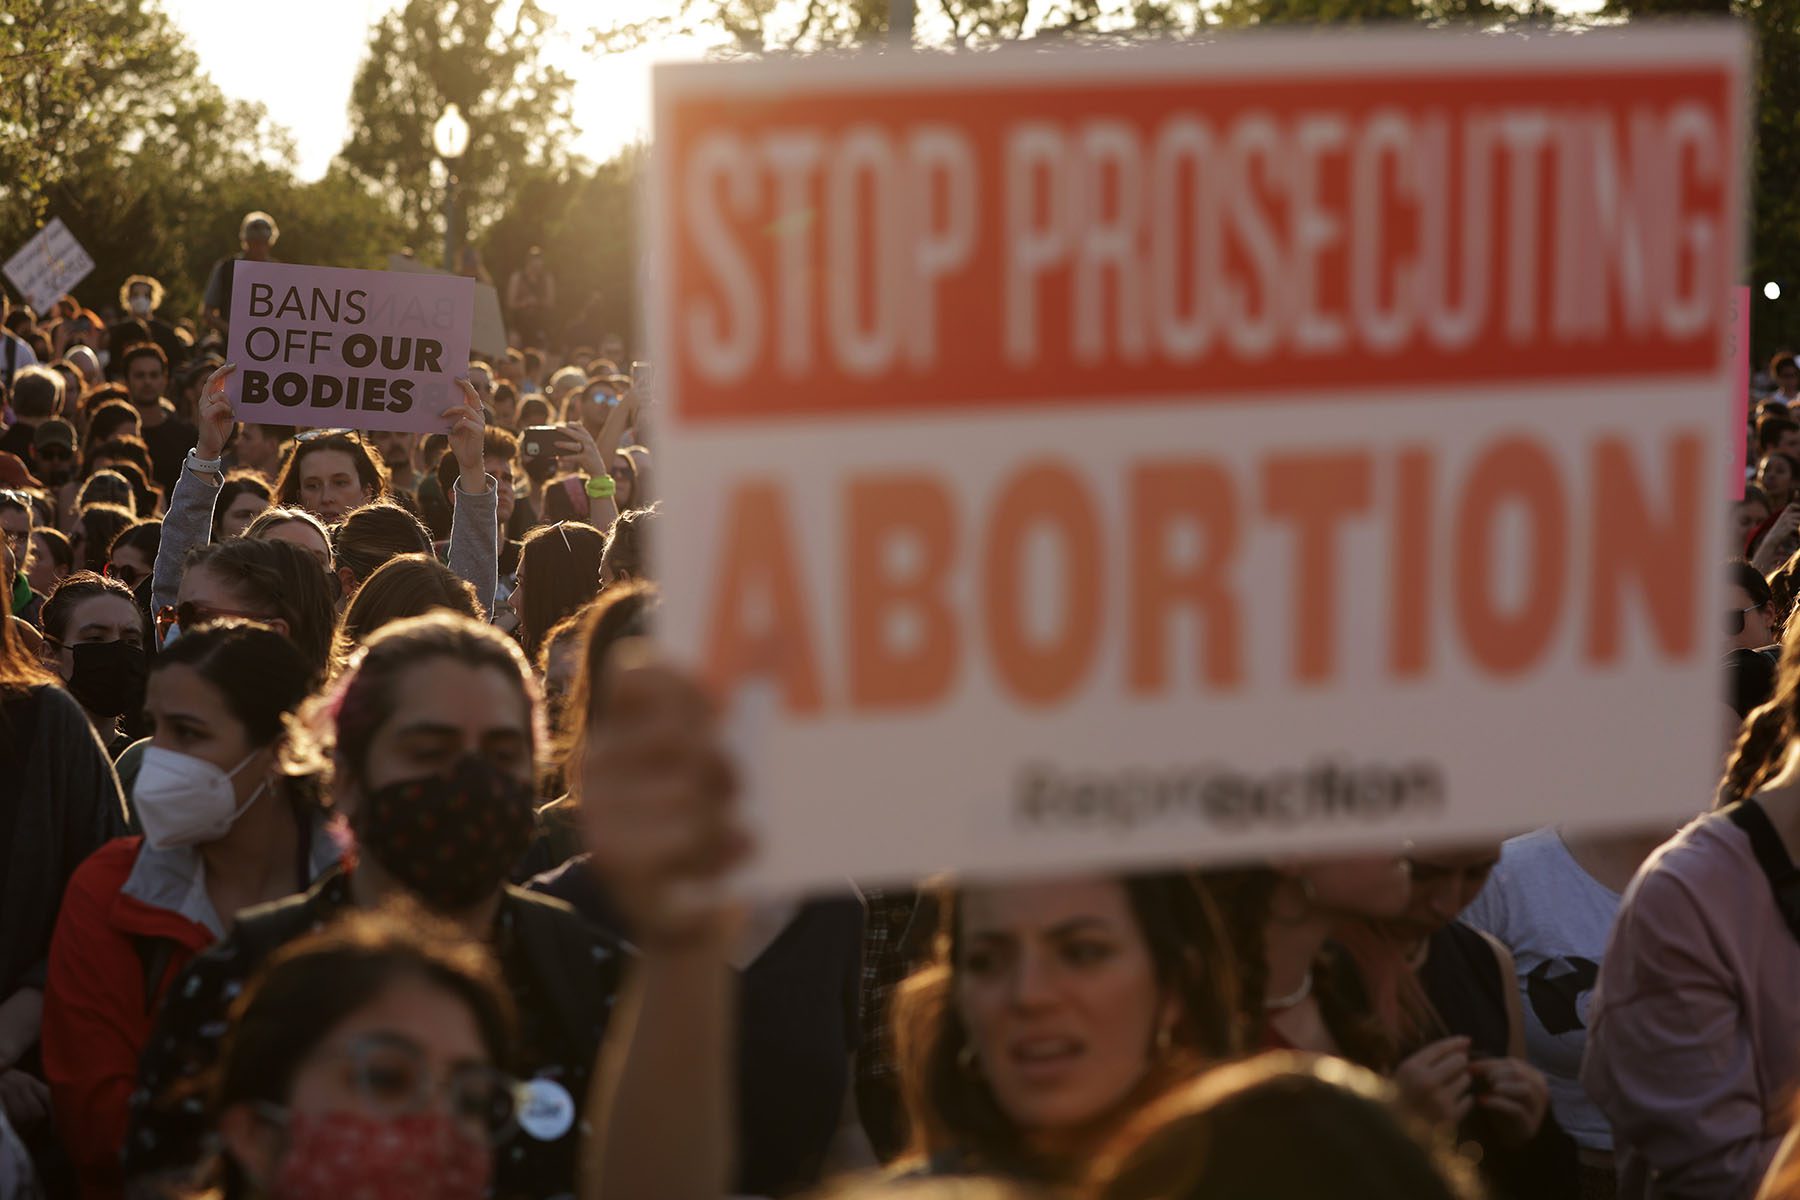 A large crowd of people protest in front of the Supreme Court. A sign in the foreground reads "Stop Prosecuting Abortion."